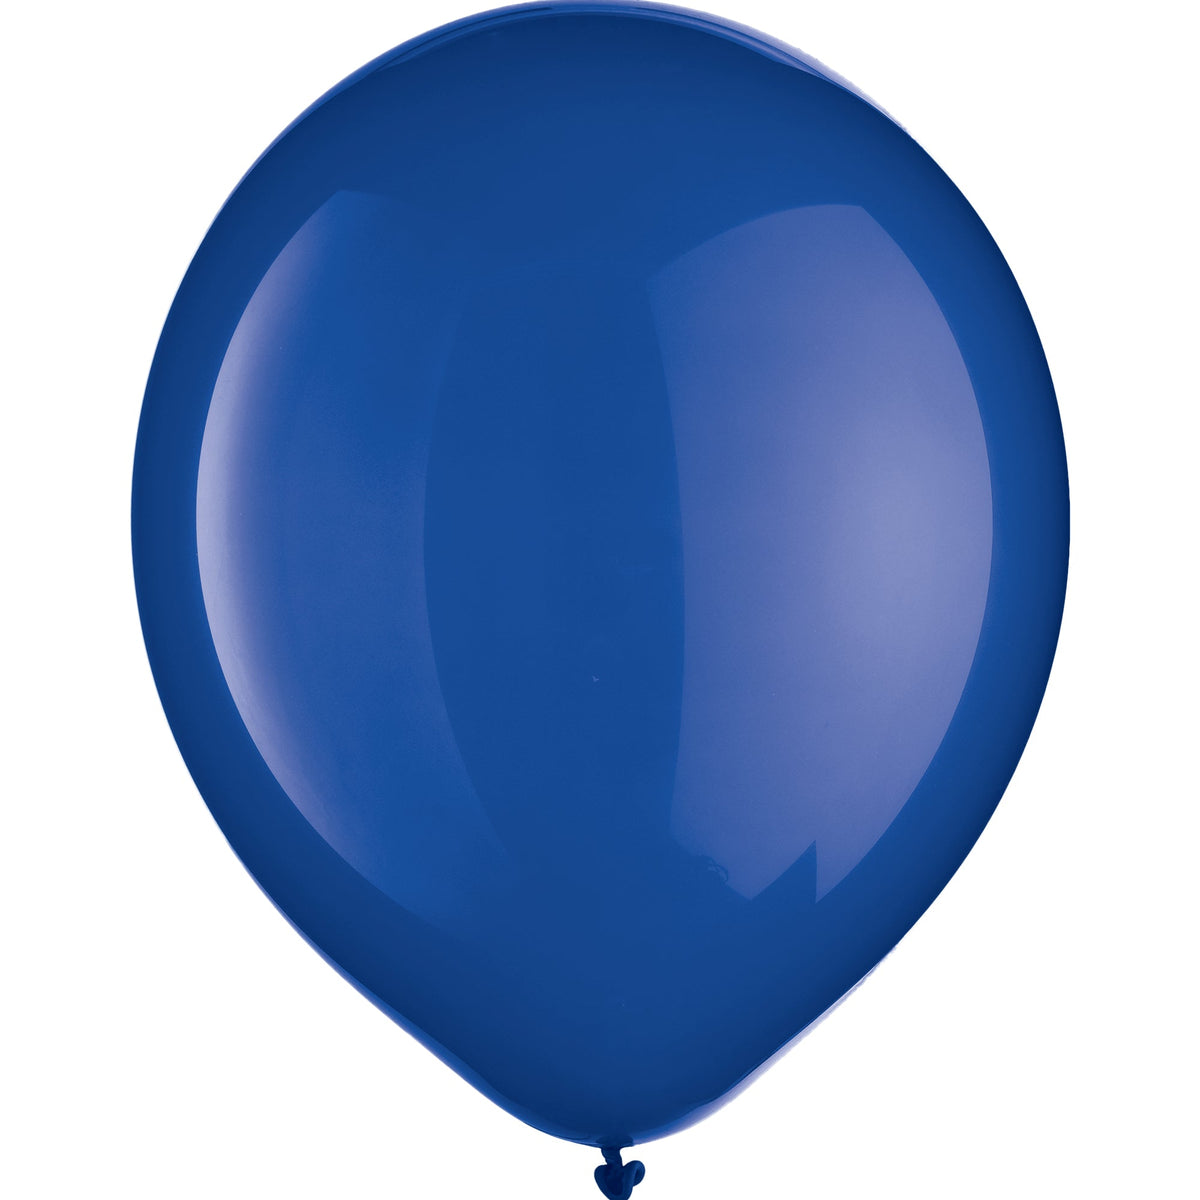 Bright Royal Blue Helium inflated Solid Color 12" Latex Balloon